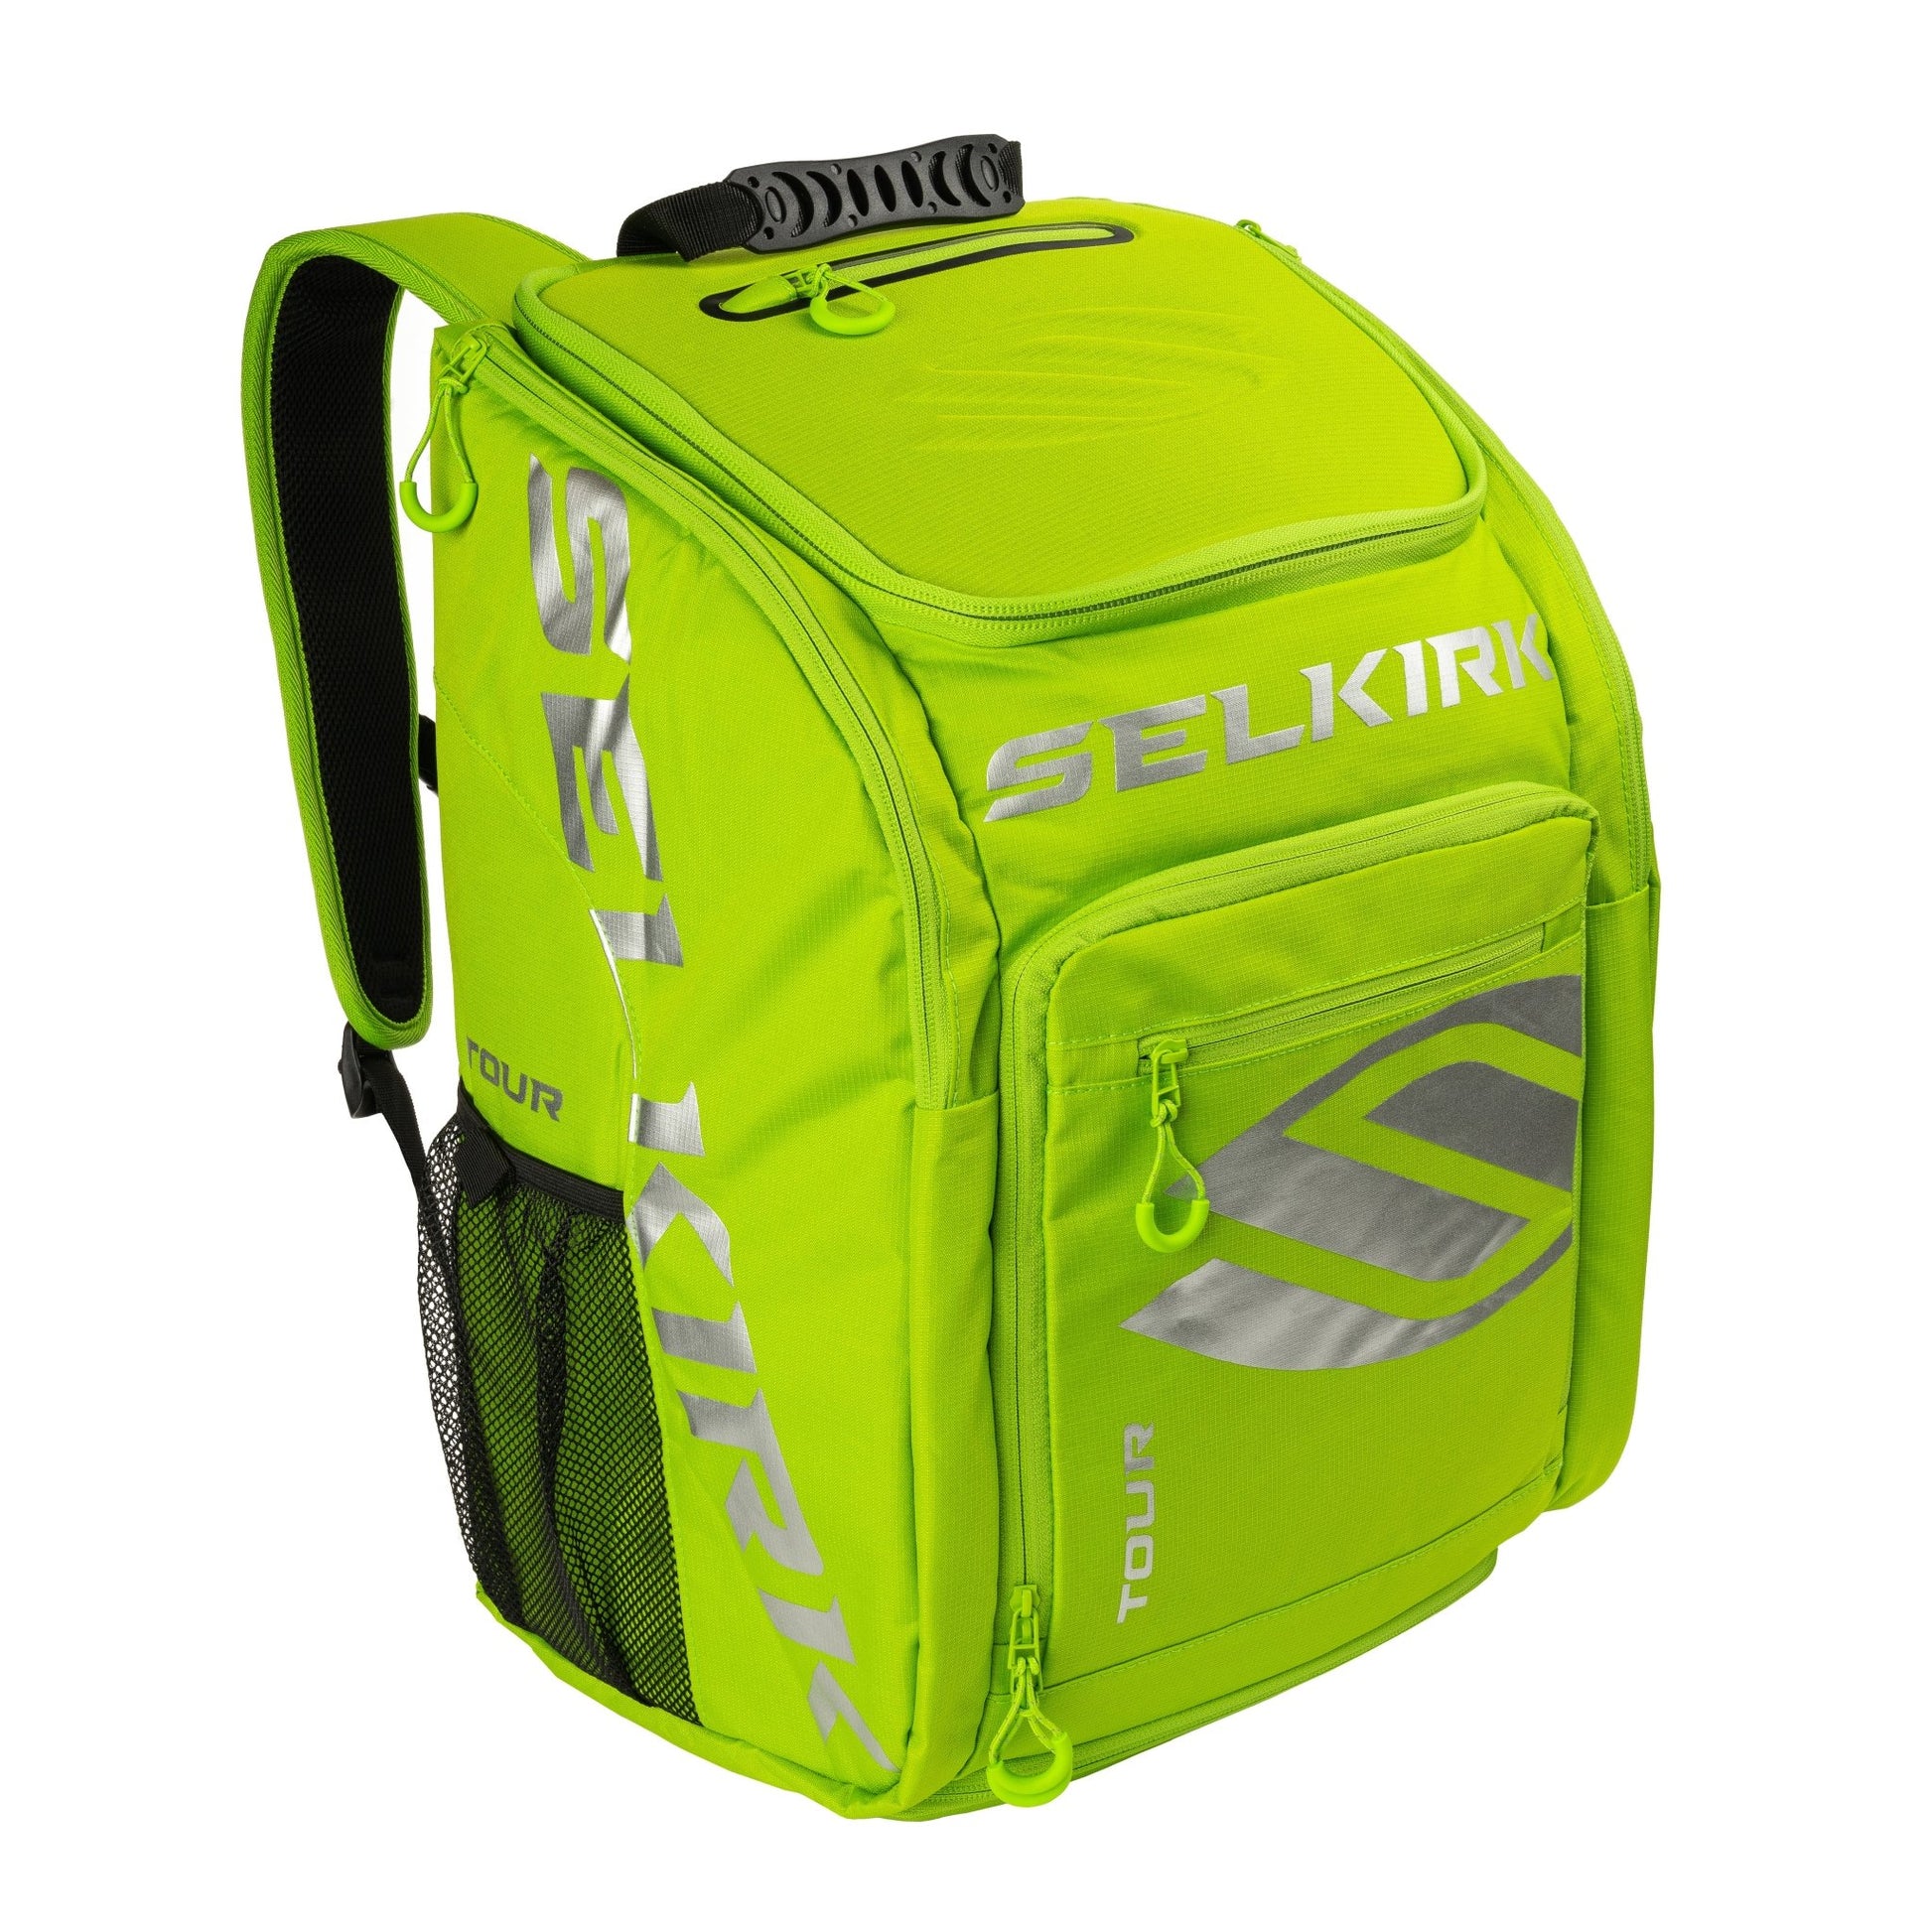 CORE SERIES TOUR BACKPACK - Grip On Golf & Pickleball Zone